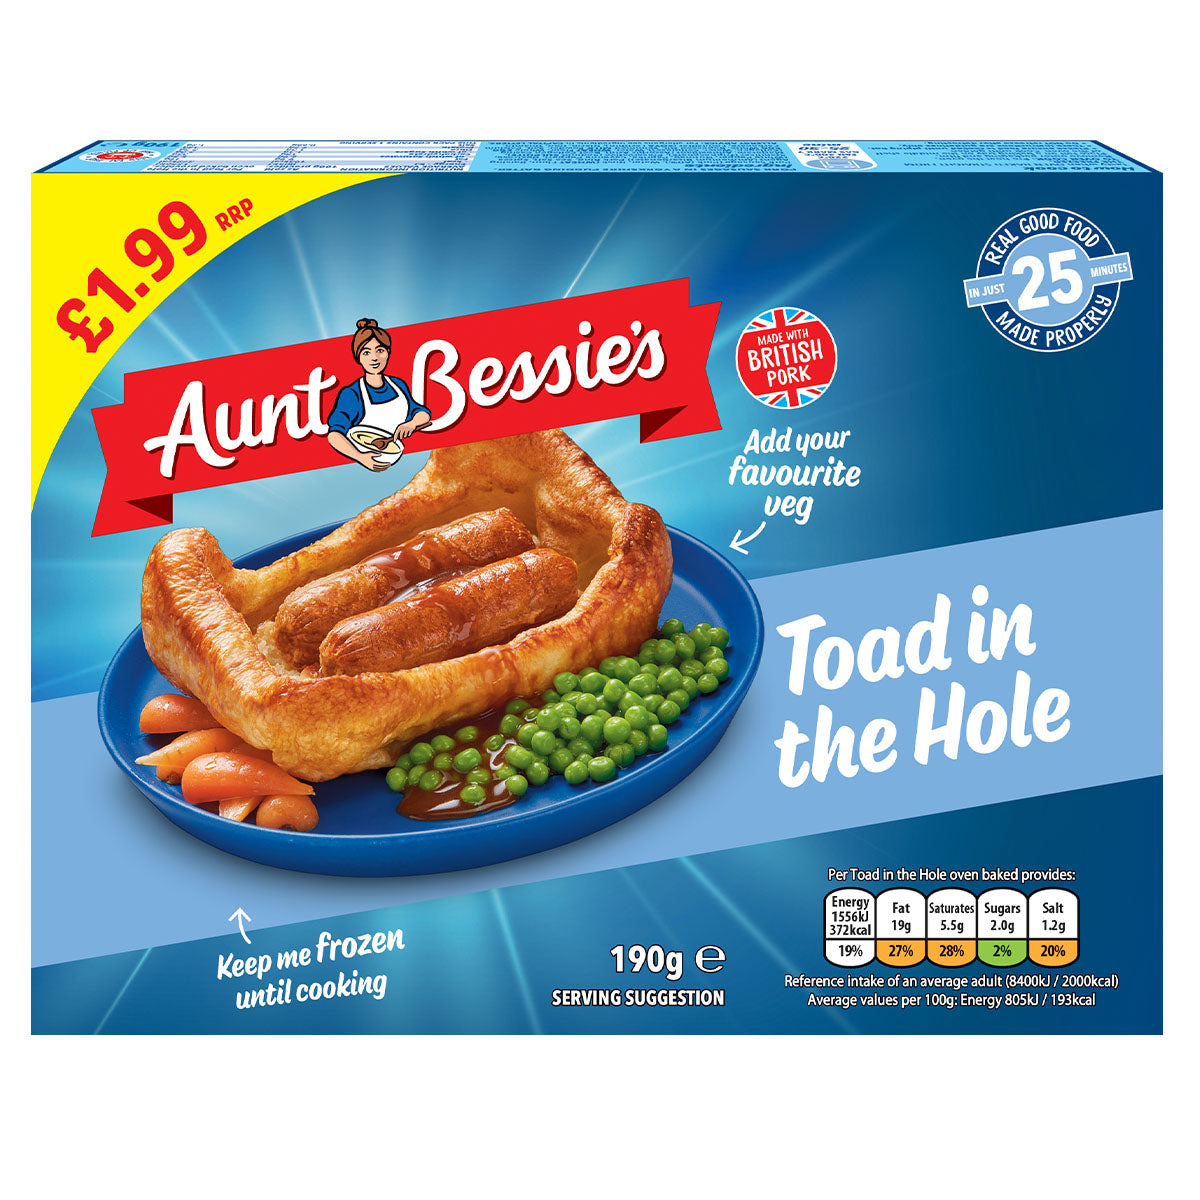 Aunt Bessies - Toad in the Hole - 190g in the hole.